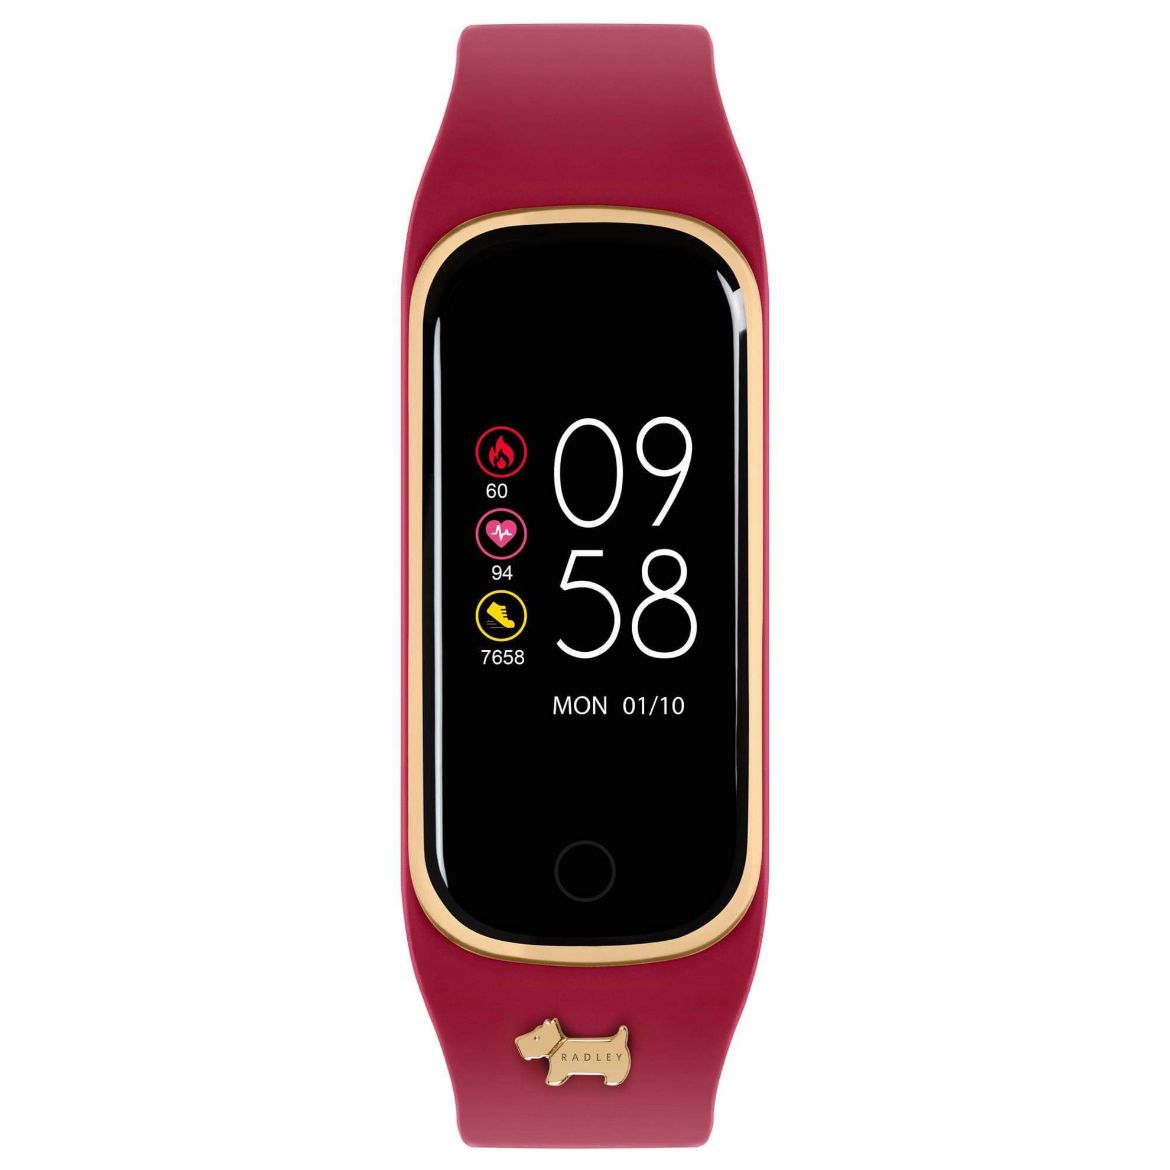 Picture of Berry Red Series 08 Radley Smart Watch